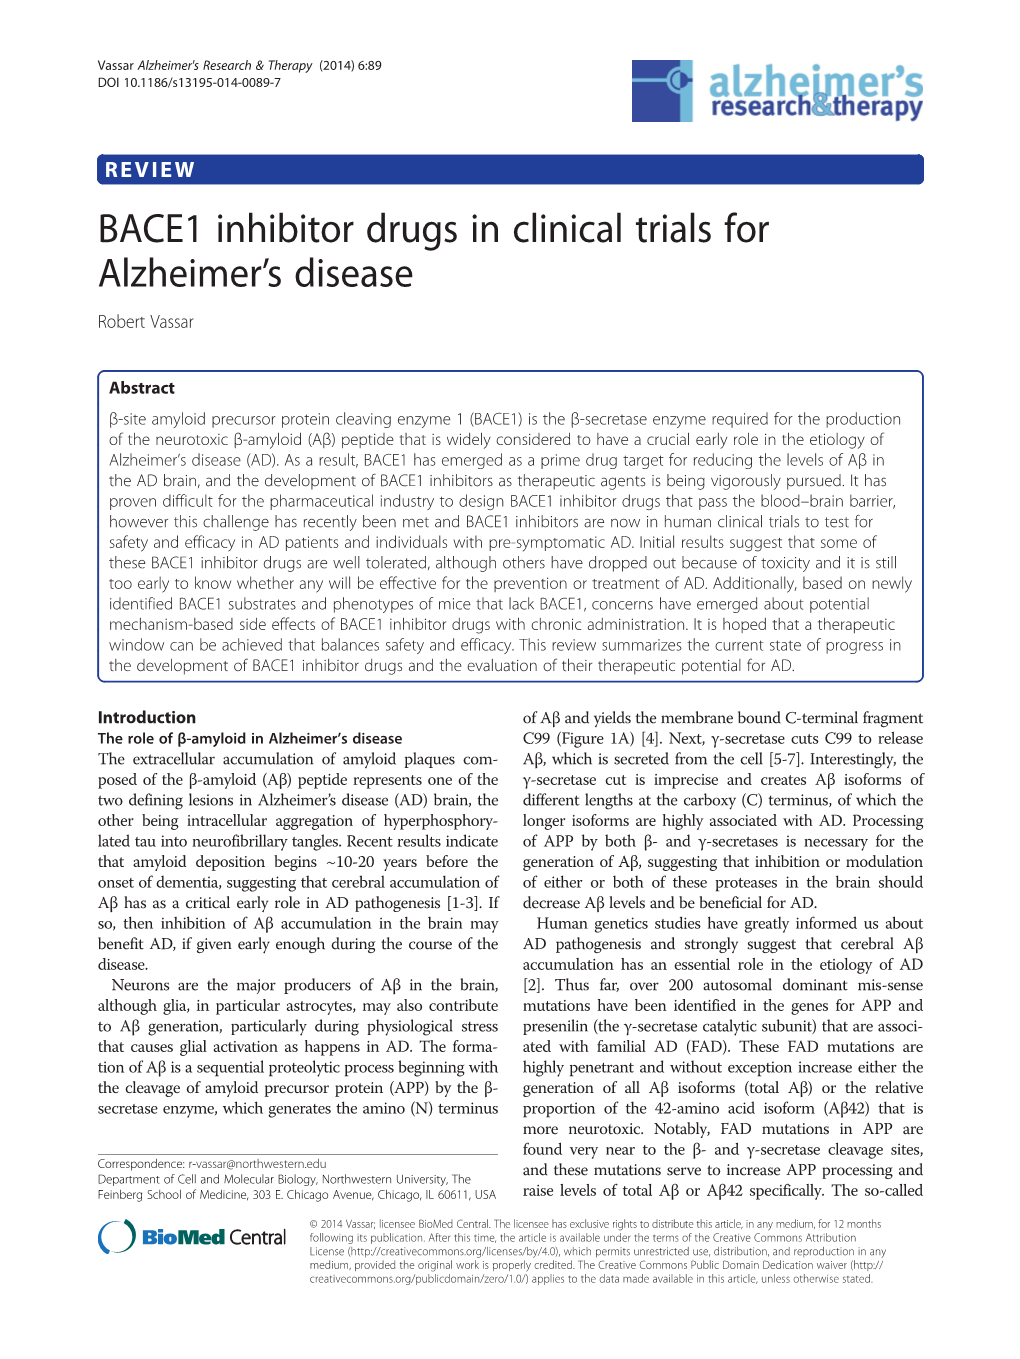 BACE1 Inhibitor Drugs in Clinical Trials for Alzheimer's Disease